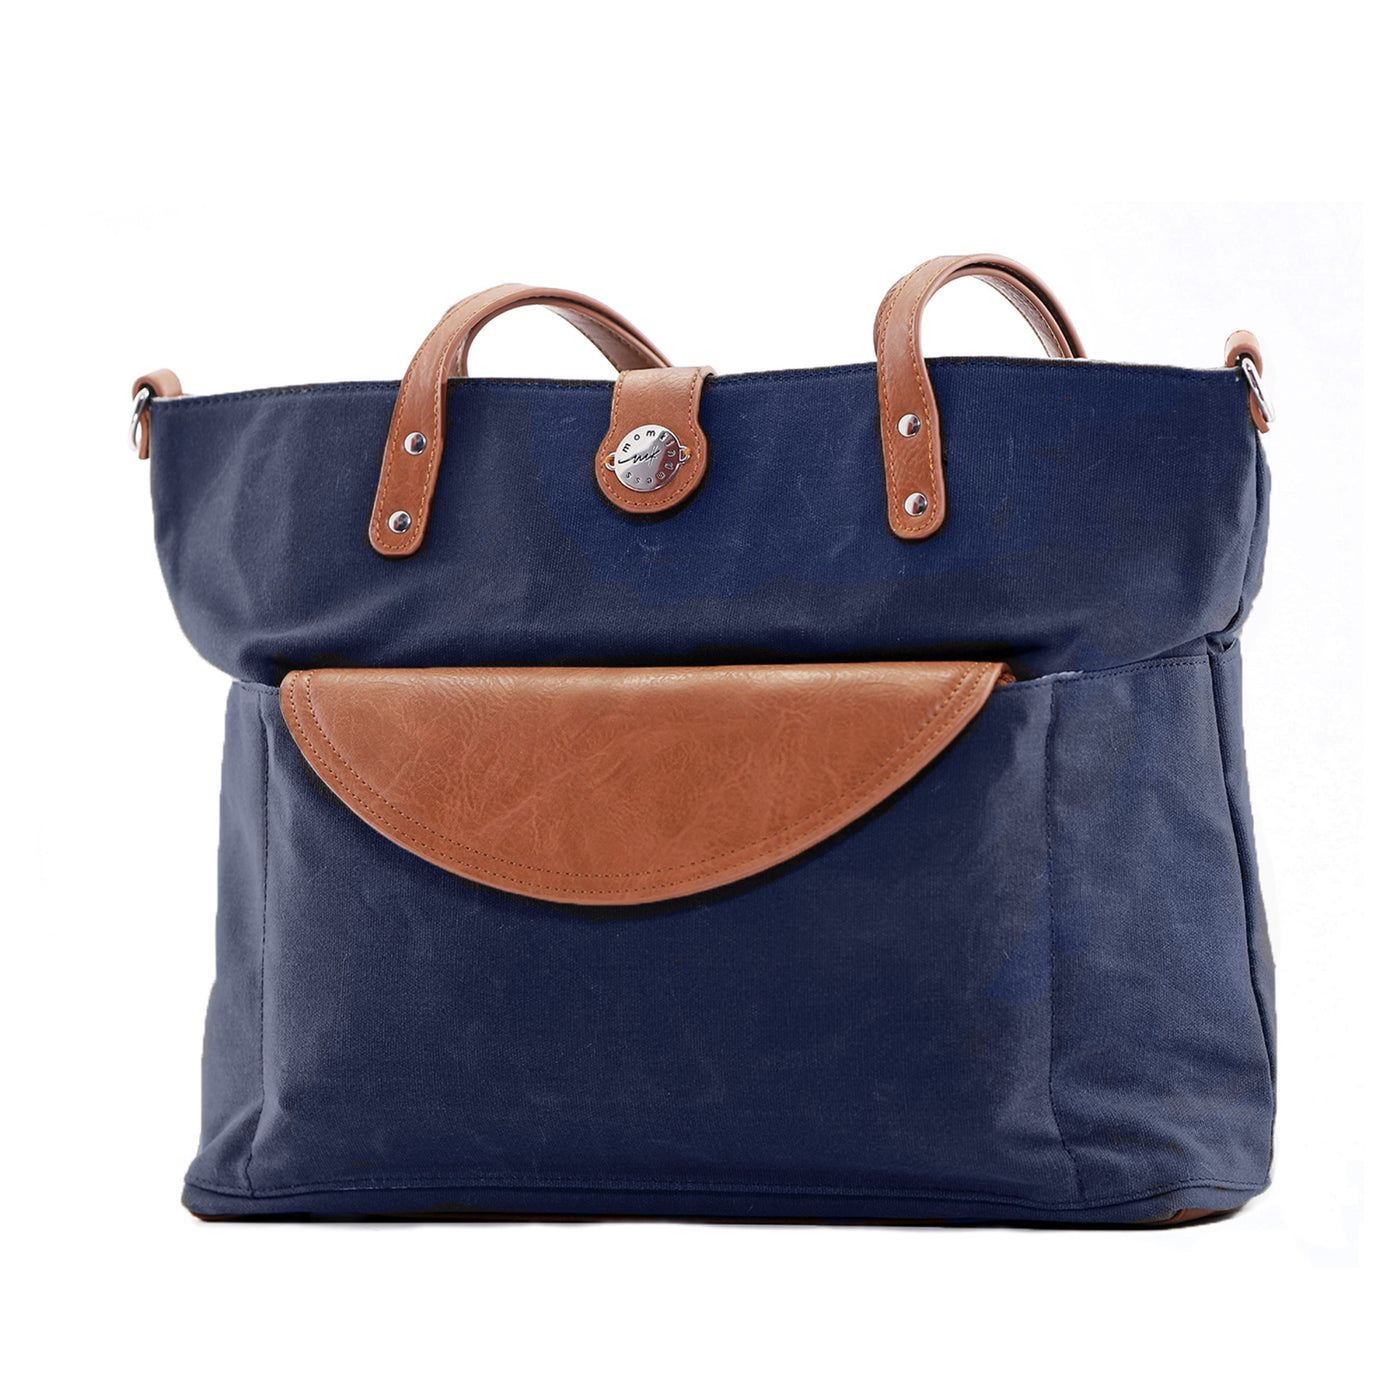 Navy waxed canvas tote with brown vegan leather accents and clutch tucked in front pocket, shown on white background.